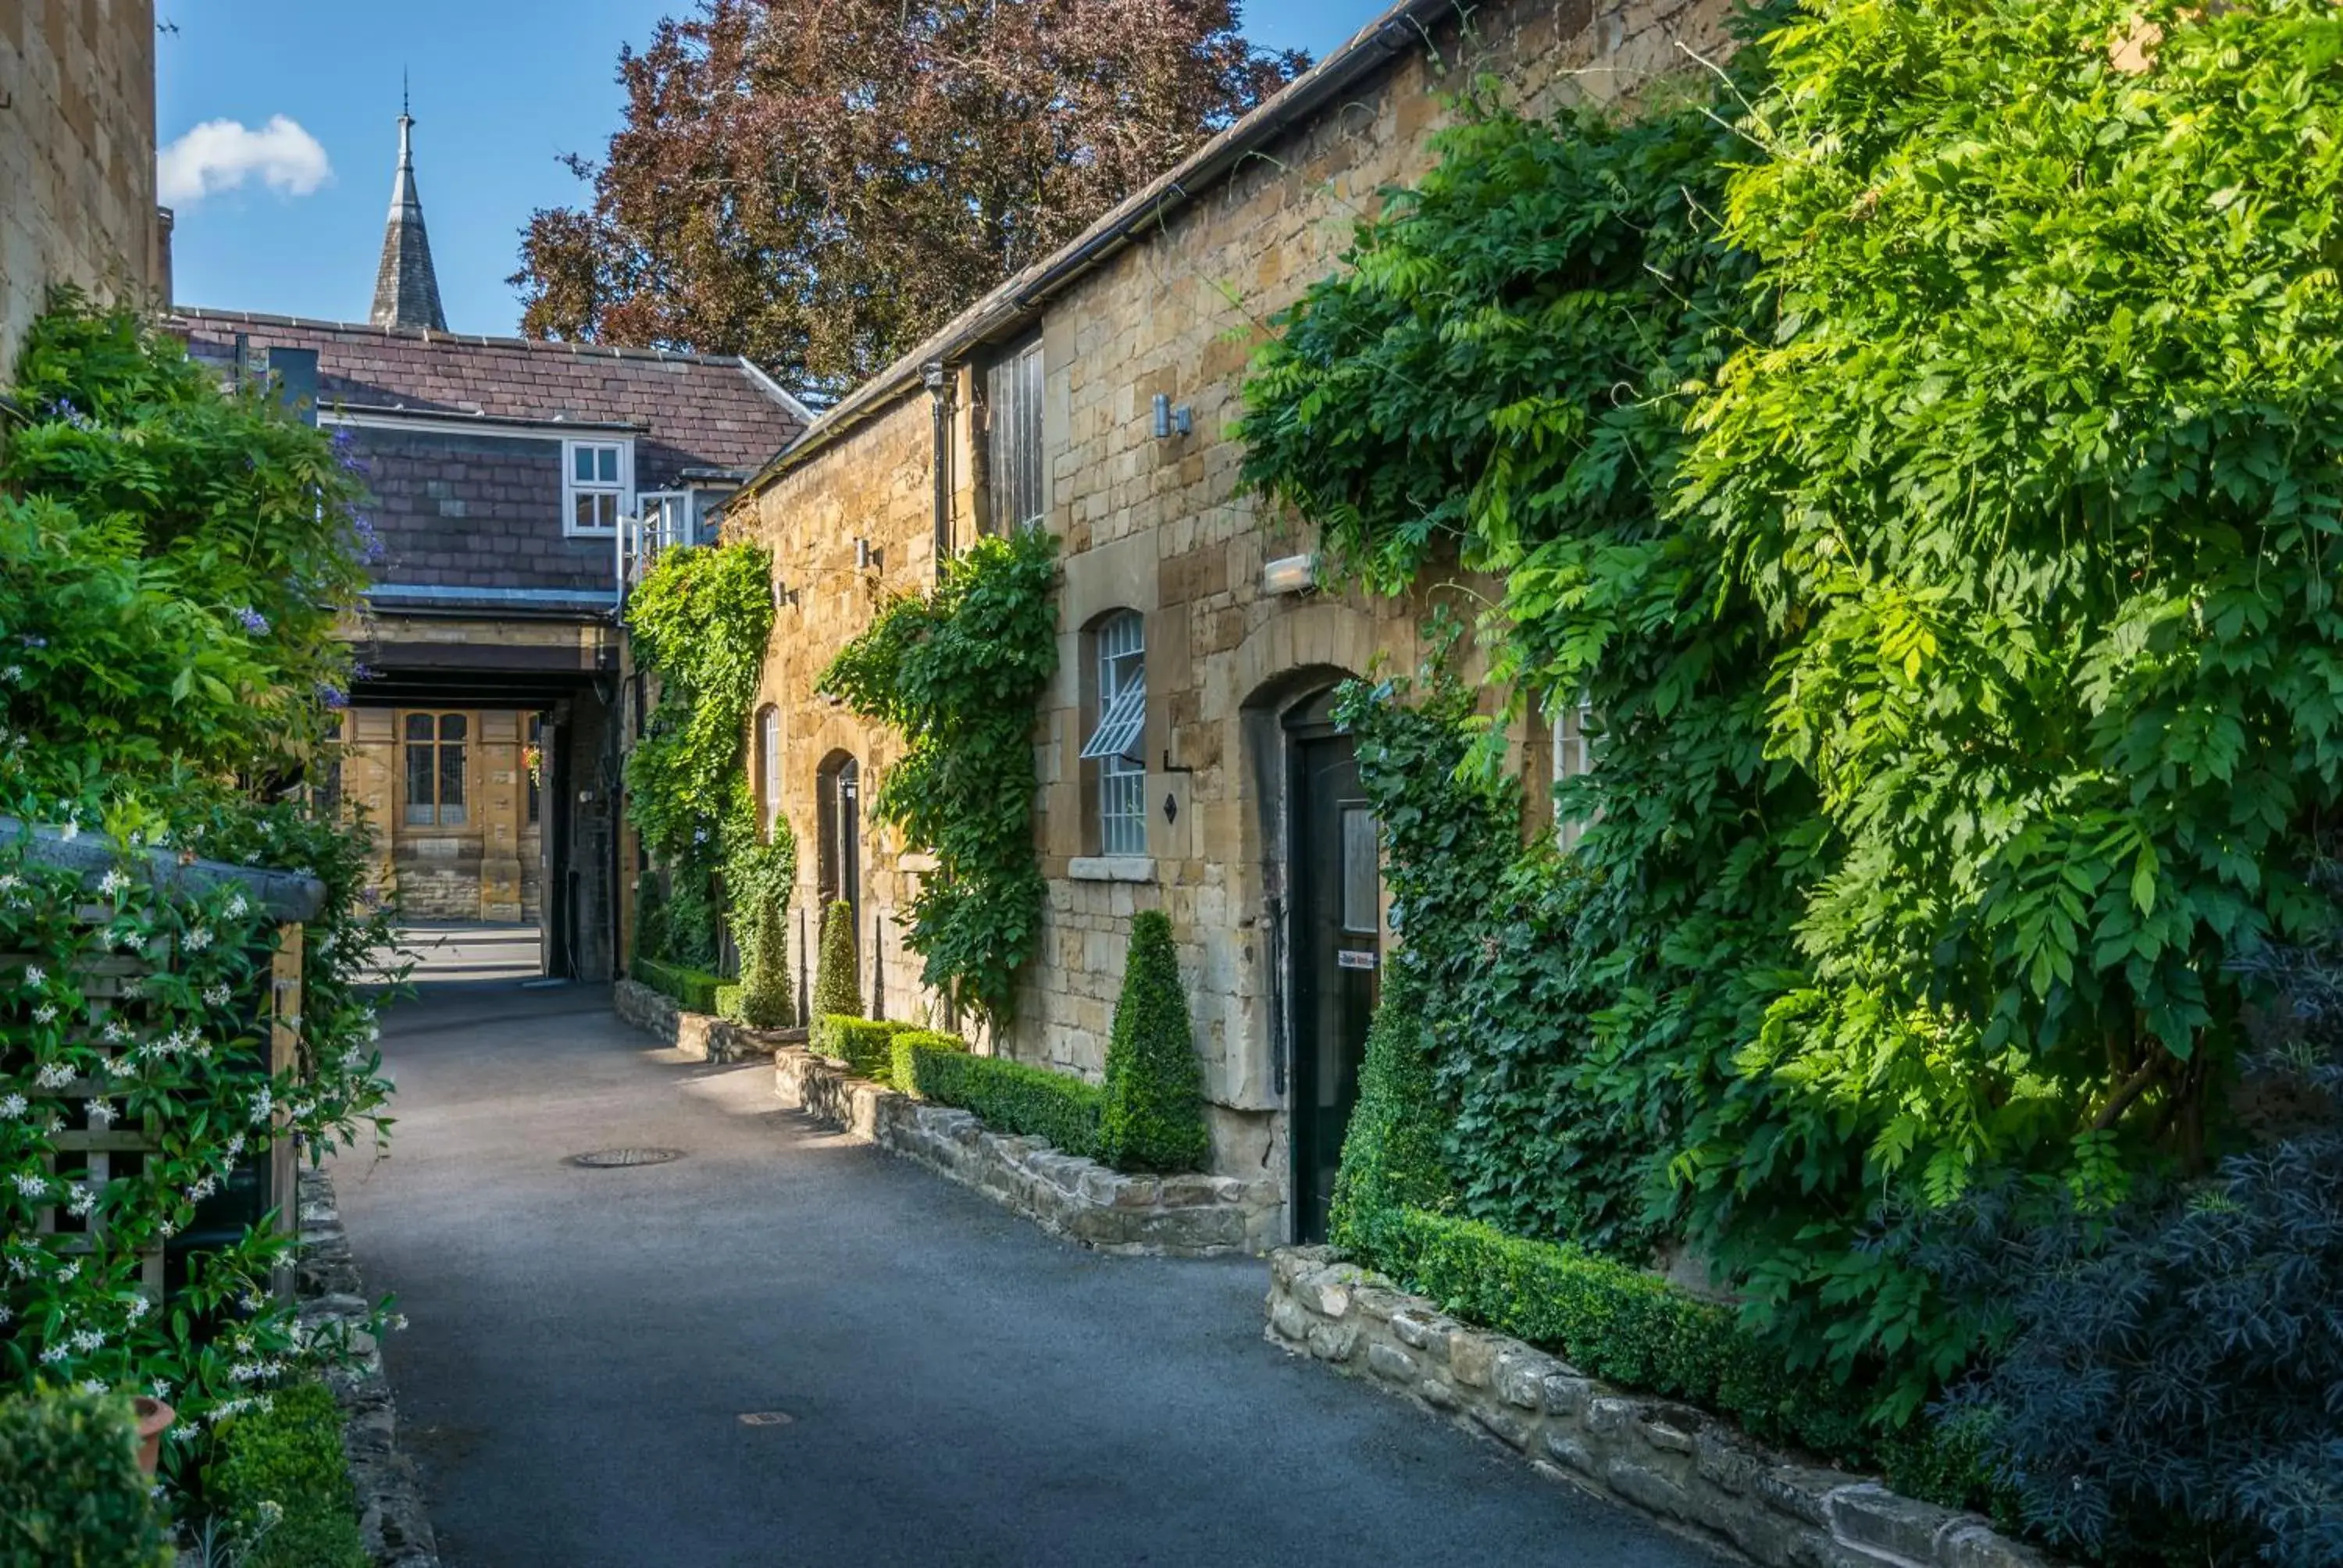 On site, Property Building in The White Hart Royal, Moreton-in-Marsh, Cotswolds